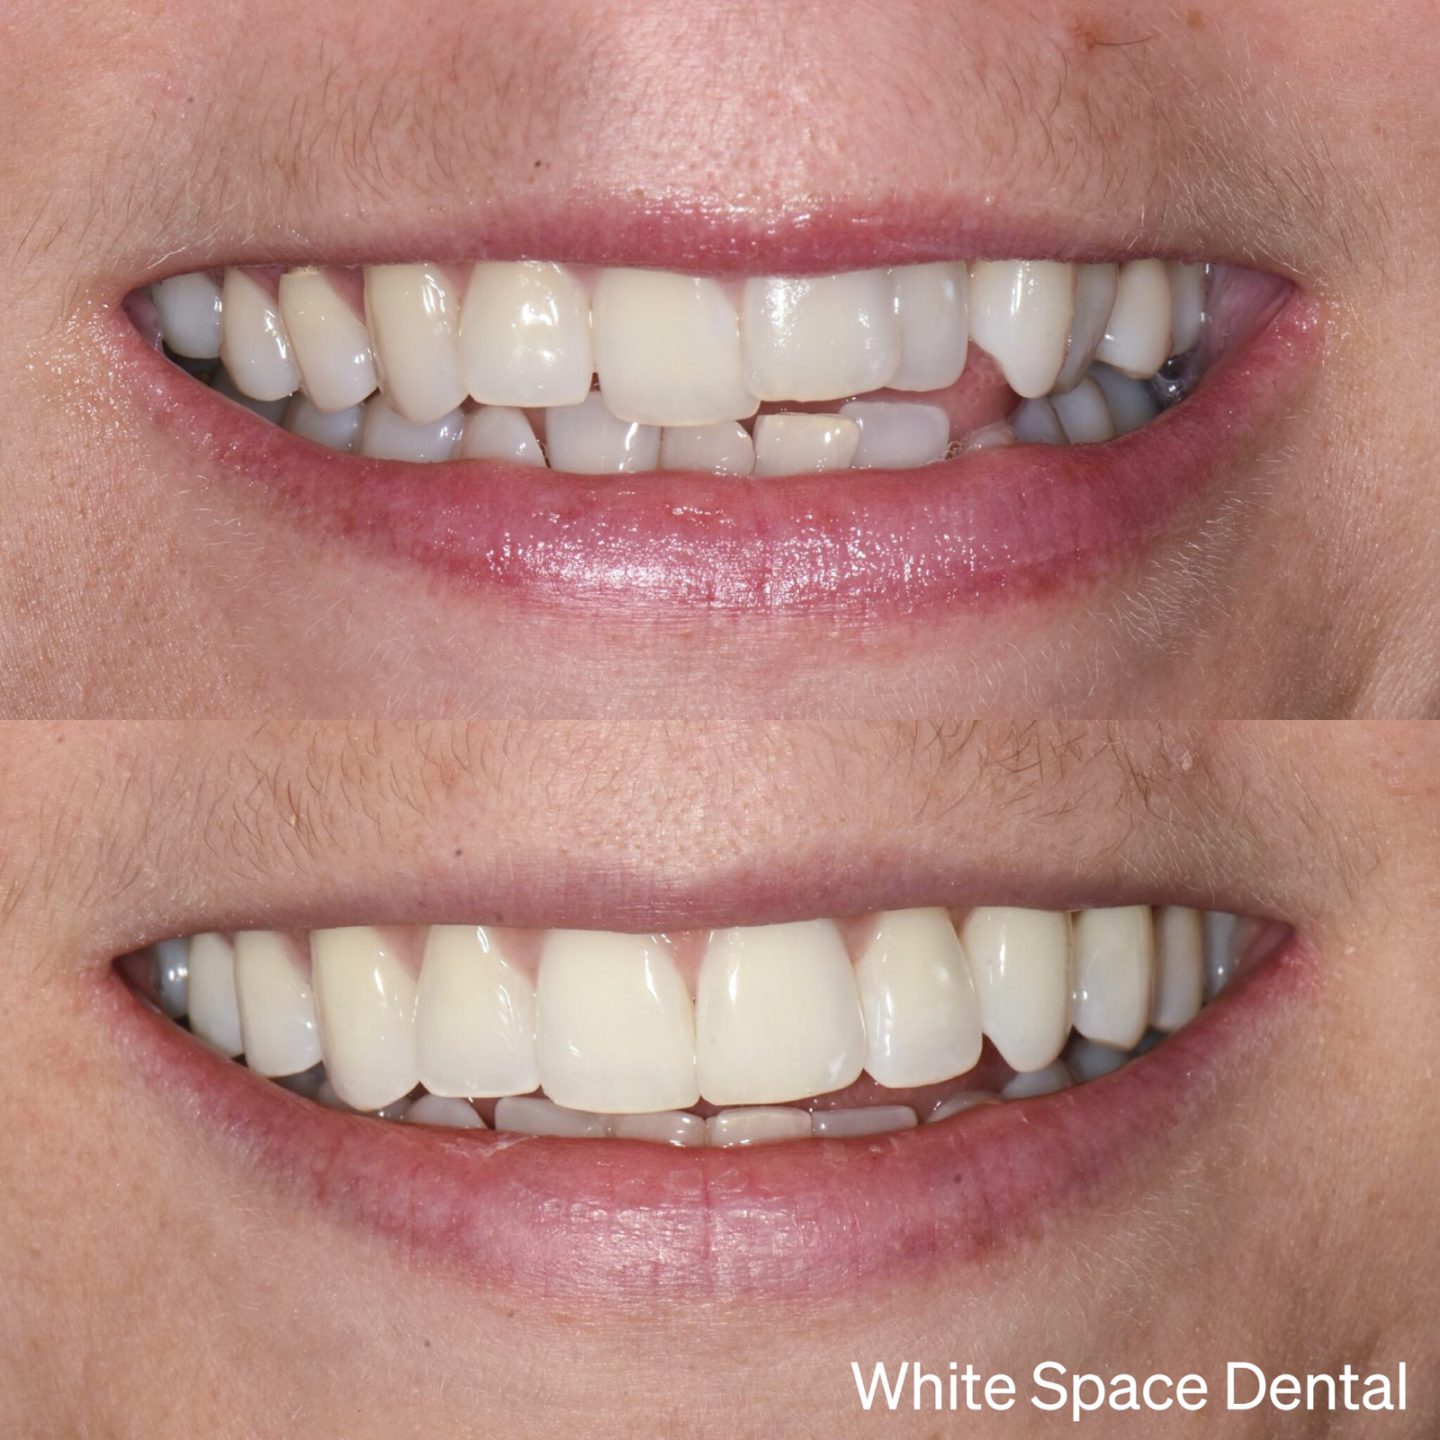 This patient received a straighter smile thanks to a virtually invisible treatment.